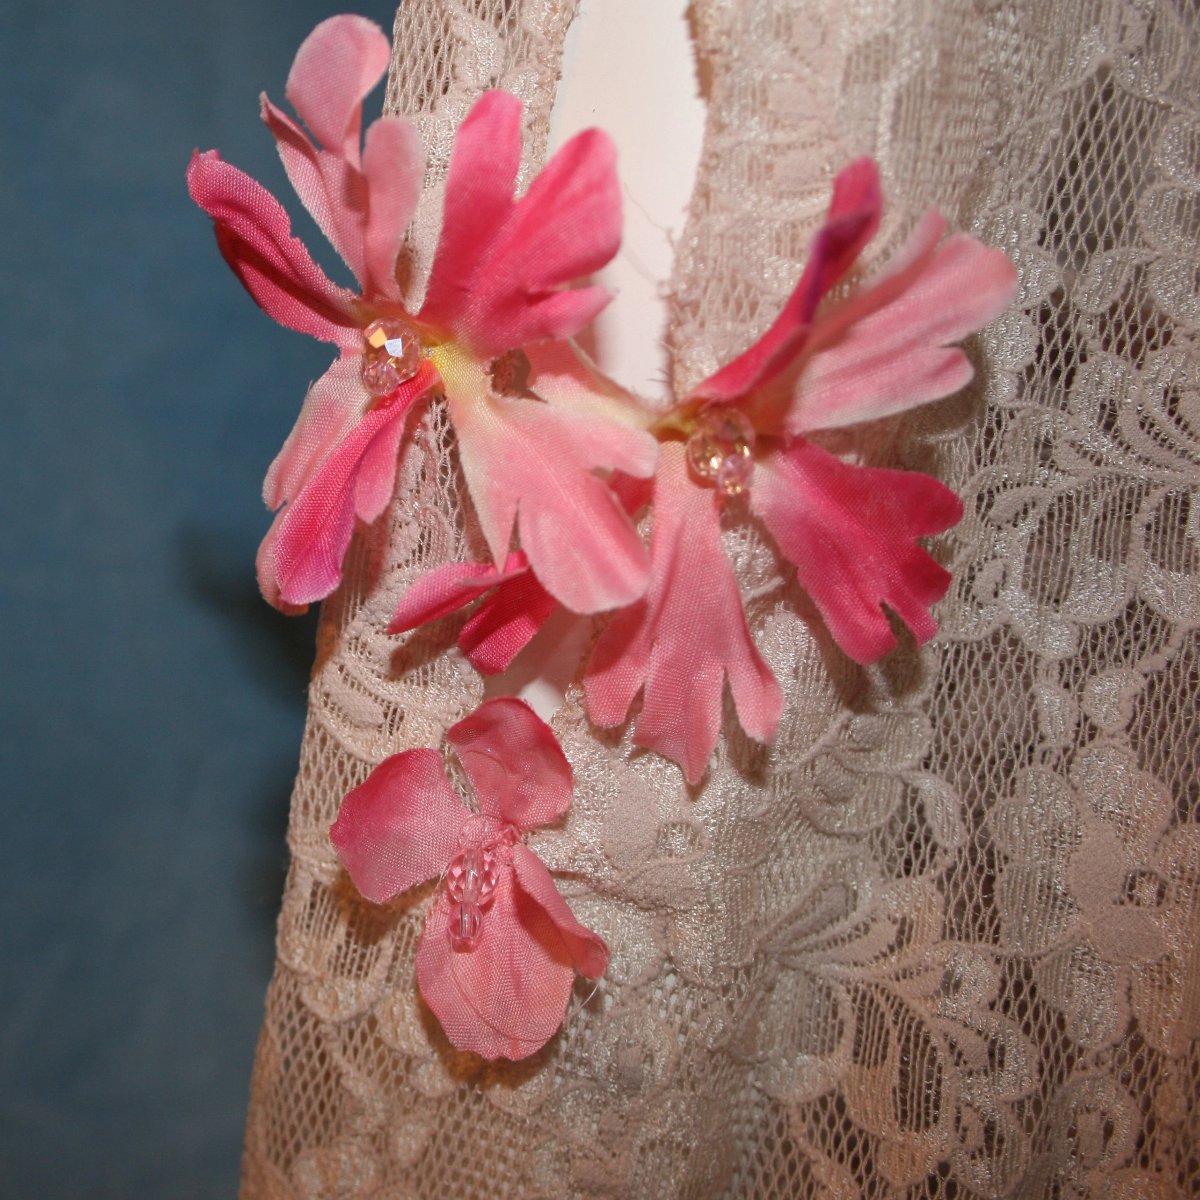 close detail view of Soft beige social ballroom dress created of beige stretch lace with oodles of beige & pink flower print semi-sheer flounces, a touch of pink silk flowers with beading, & under slip dress. A great beginner ballroom dance show dress!